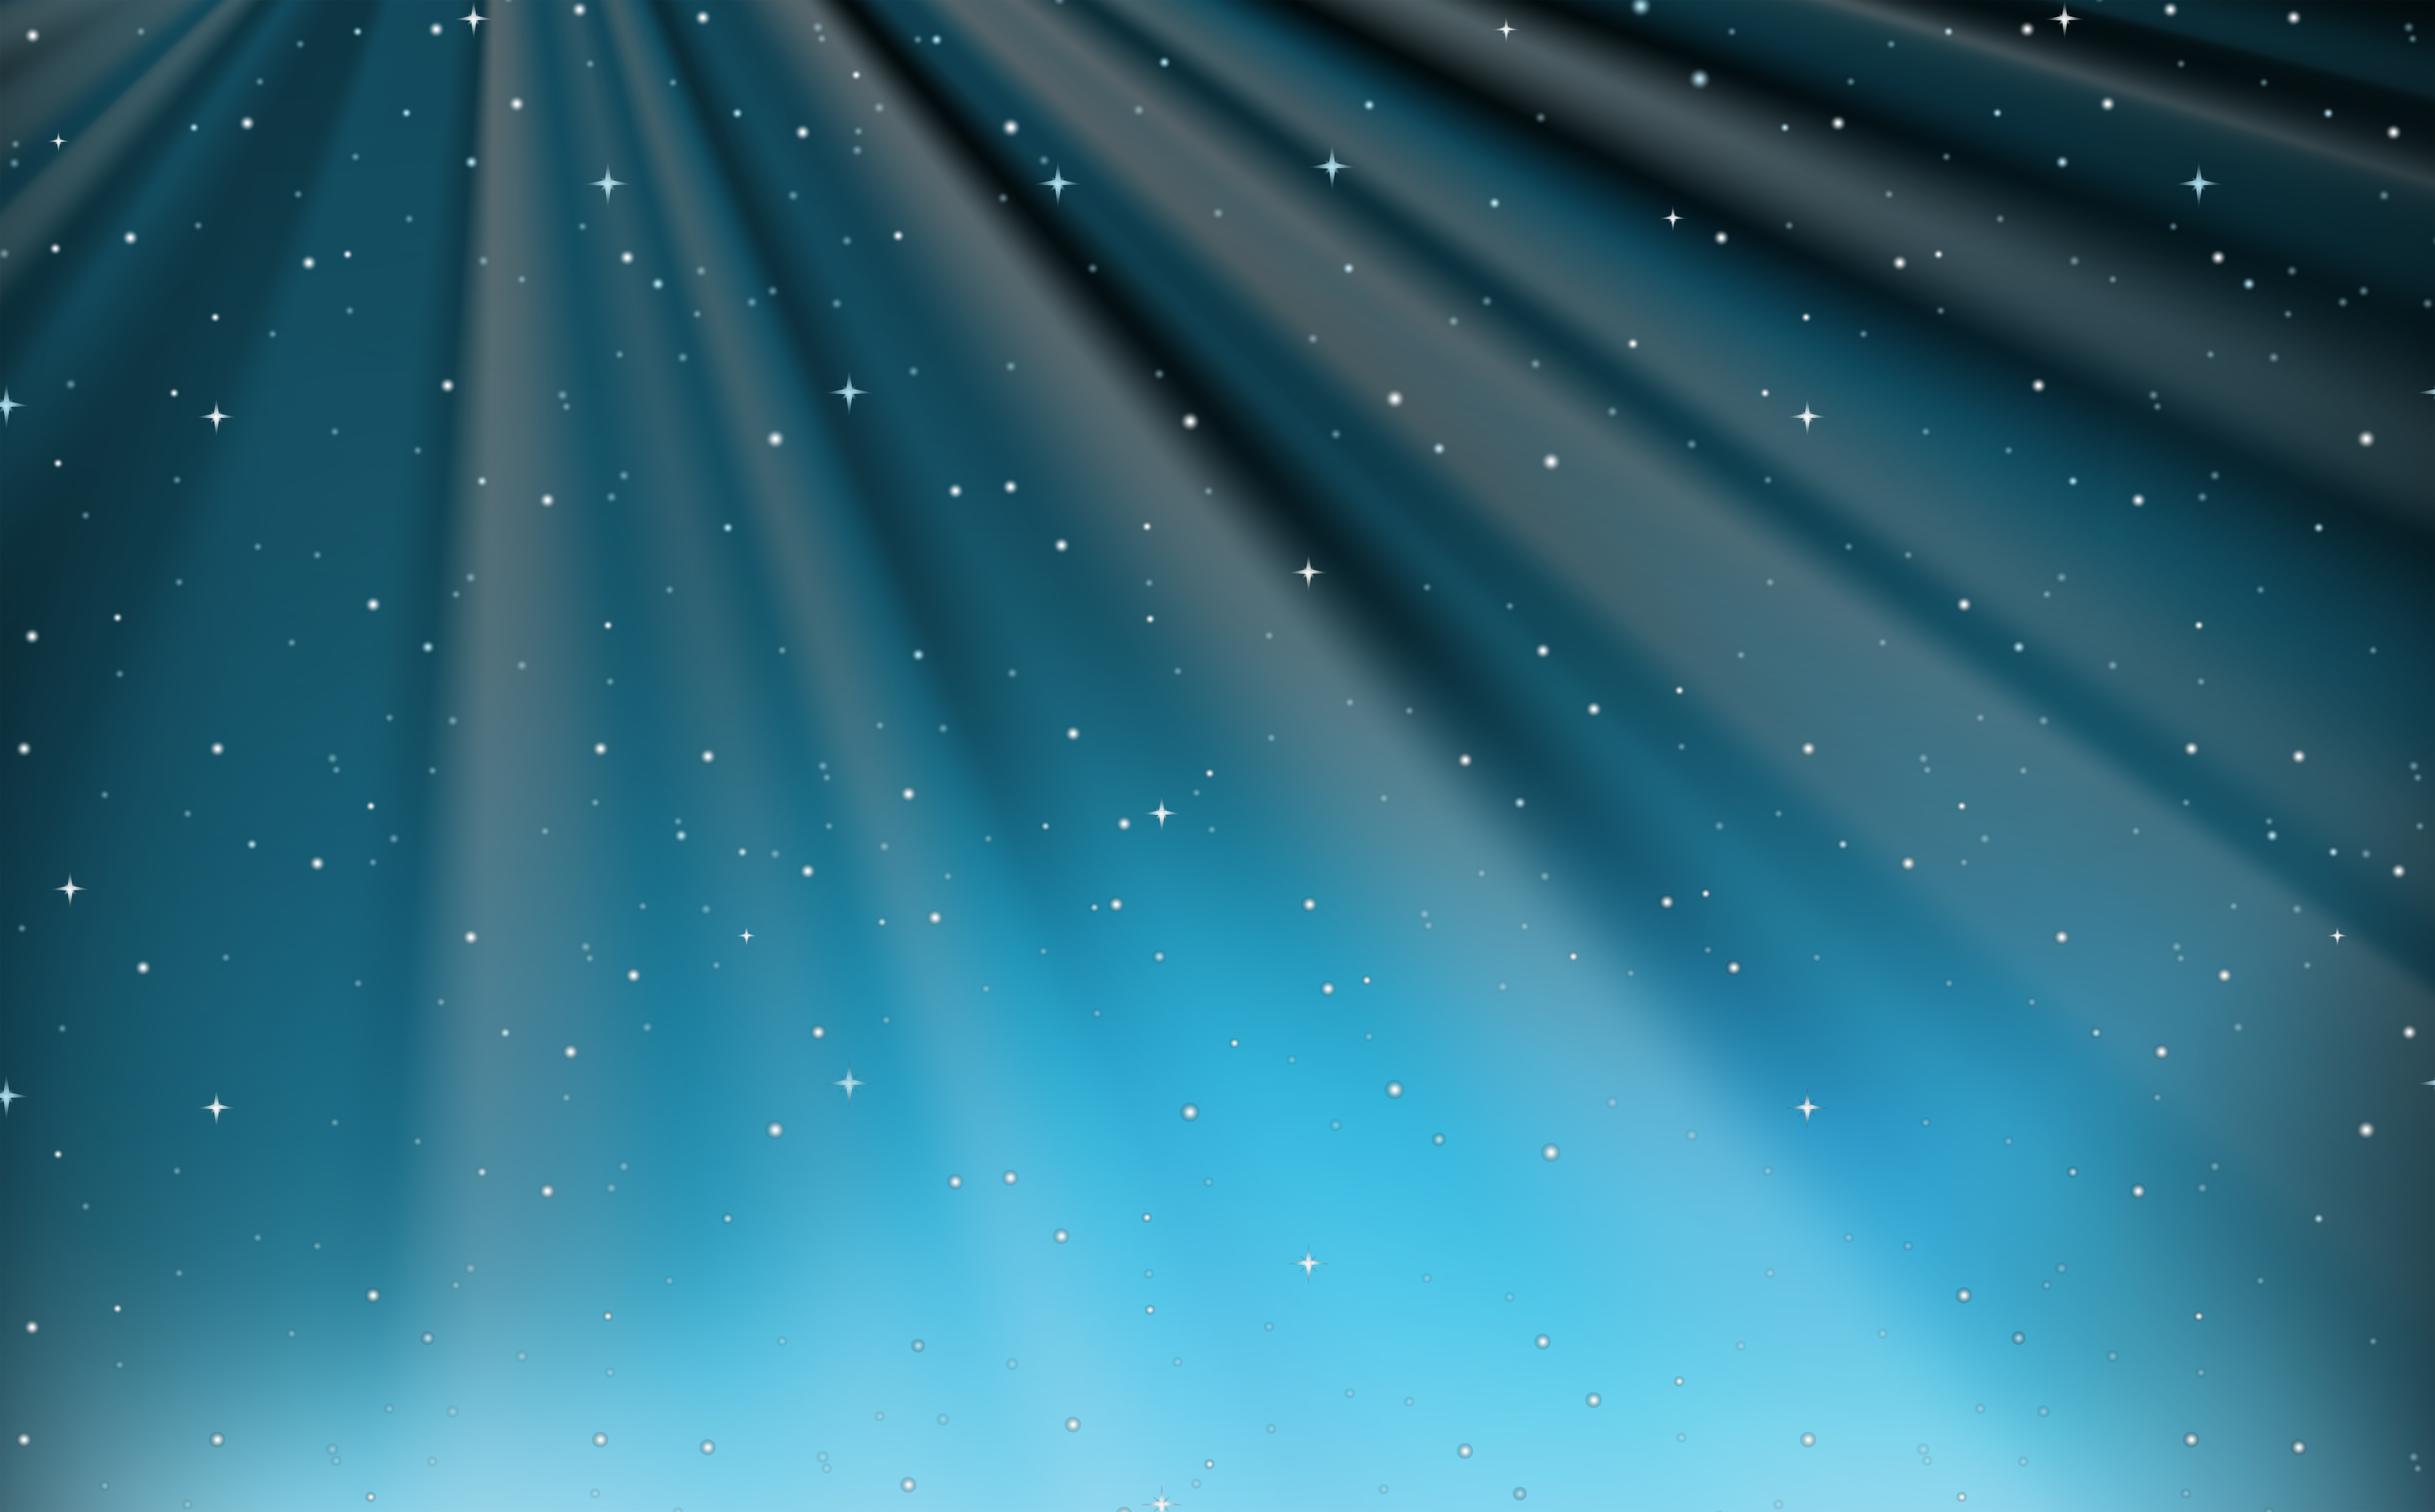 Background design with stars and blue light 303876 - Download Free